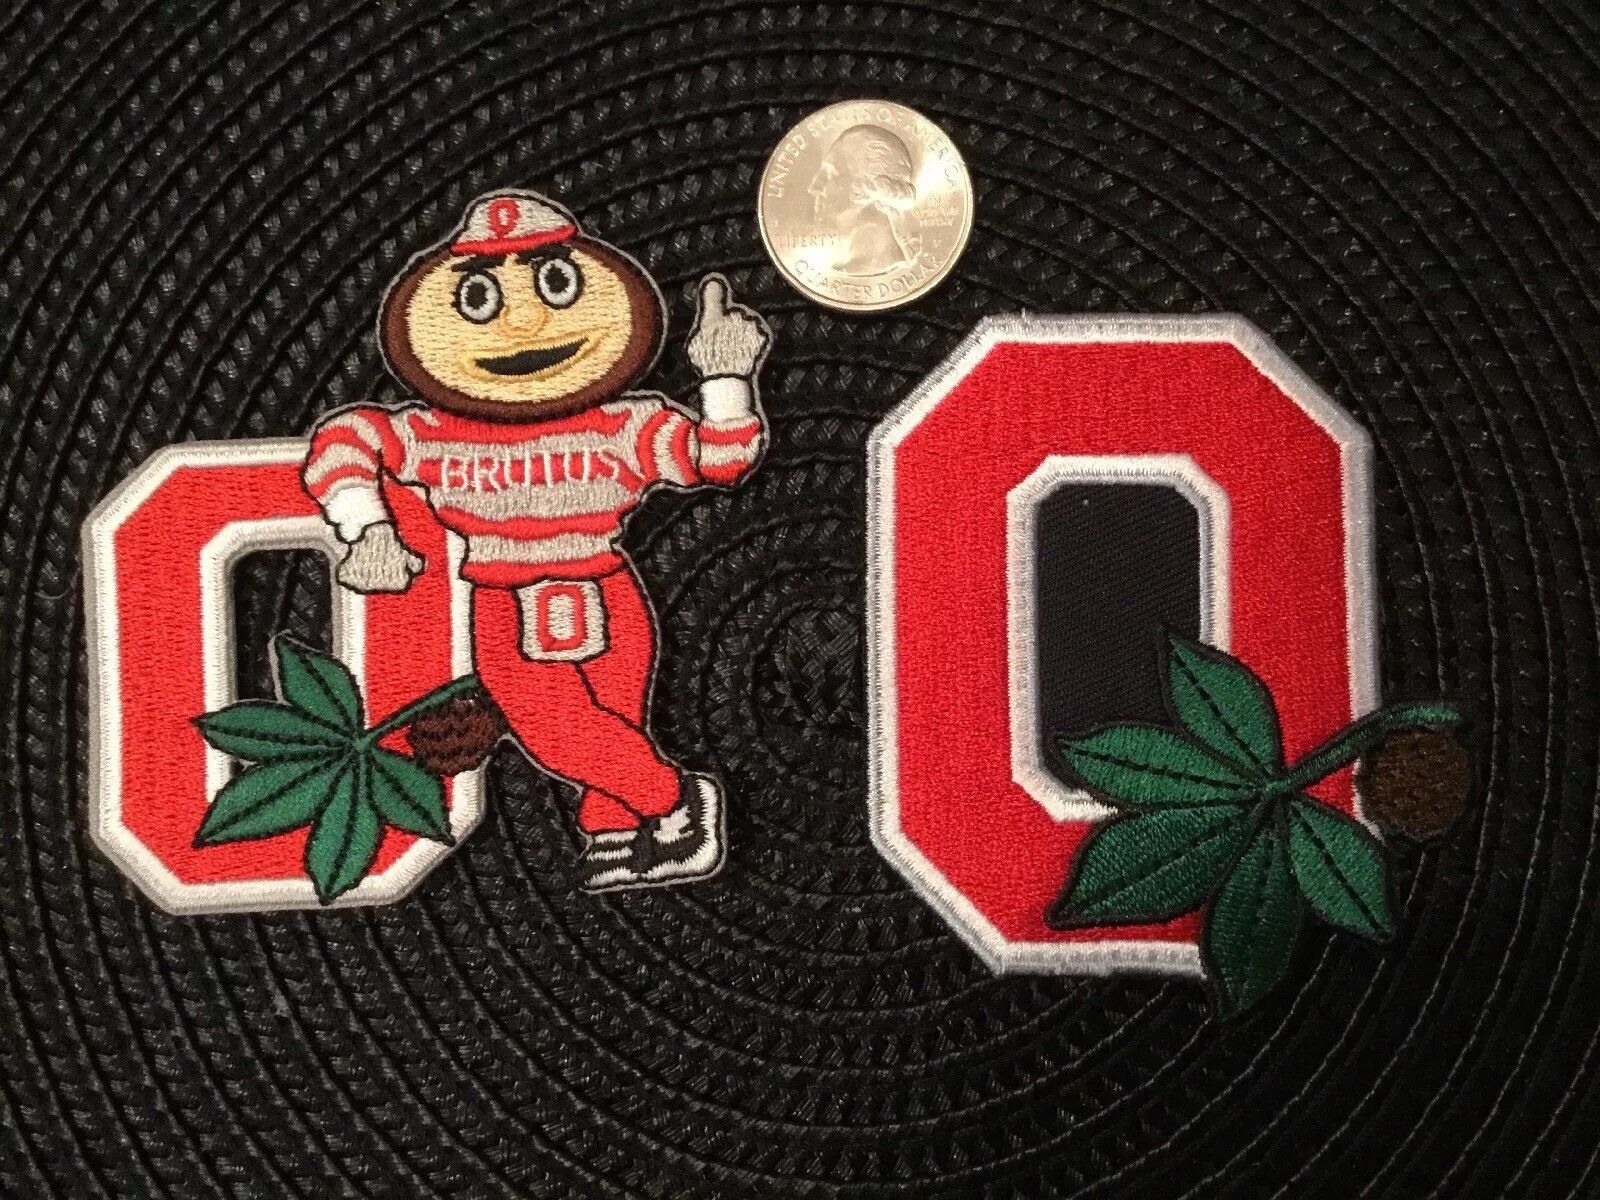 (2) OSU The Ohio State Buckeyes Vintage  Embroidered Iron On Patch lot GRADE A1